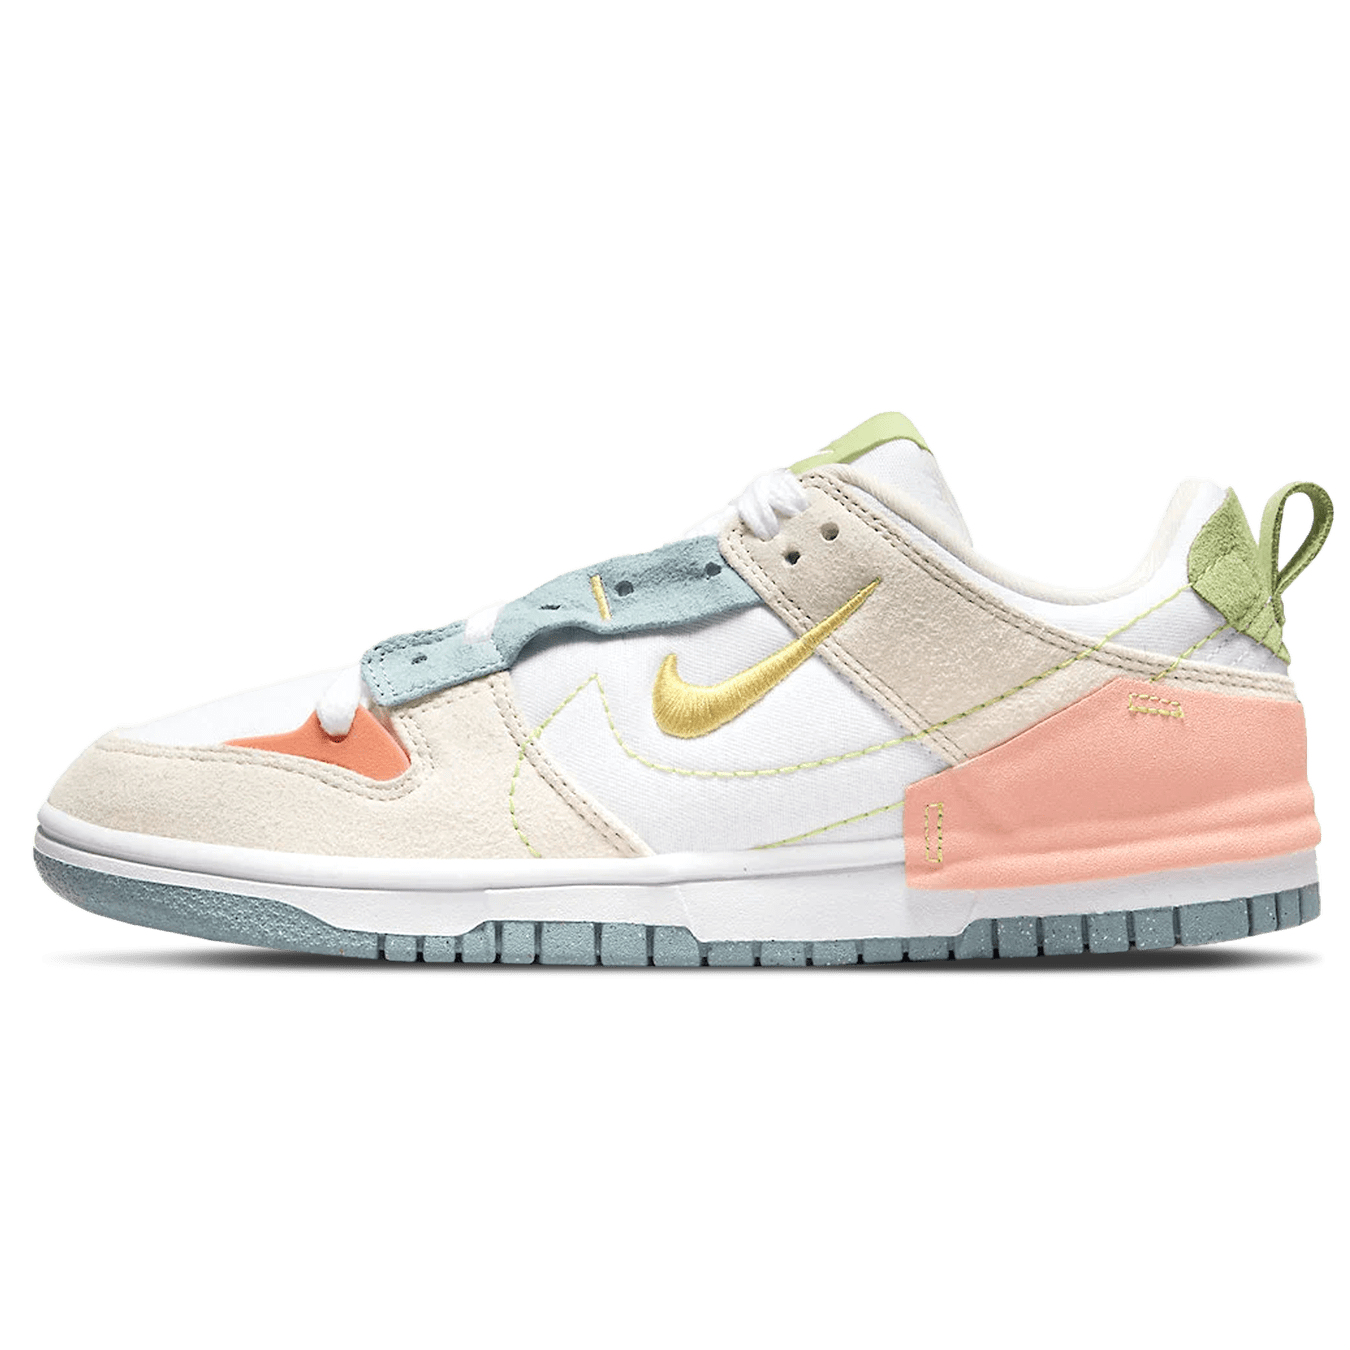 Nike Dunk Low Disrupt 2 Wmns Easter DV3457 100